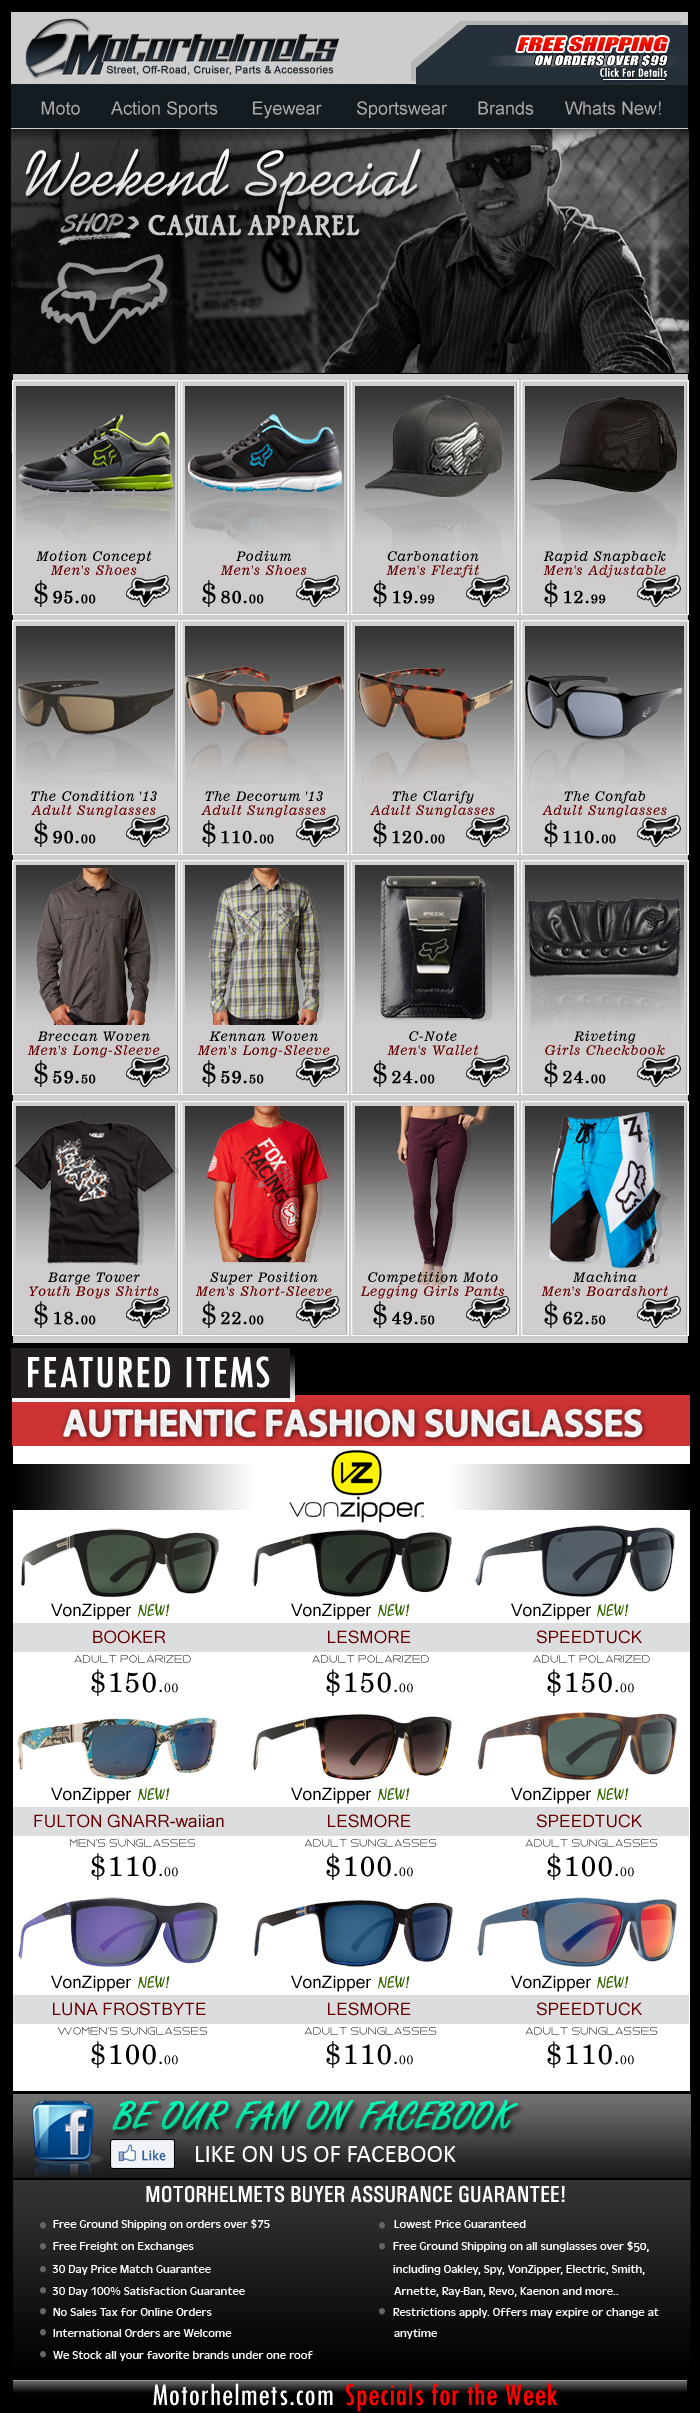 FOX Weekend Specials, NEW and ON SALE Styles...SHOP NOW!